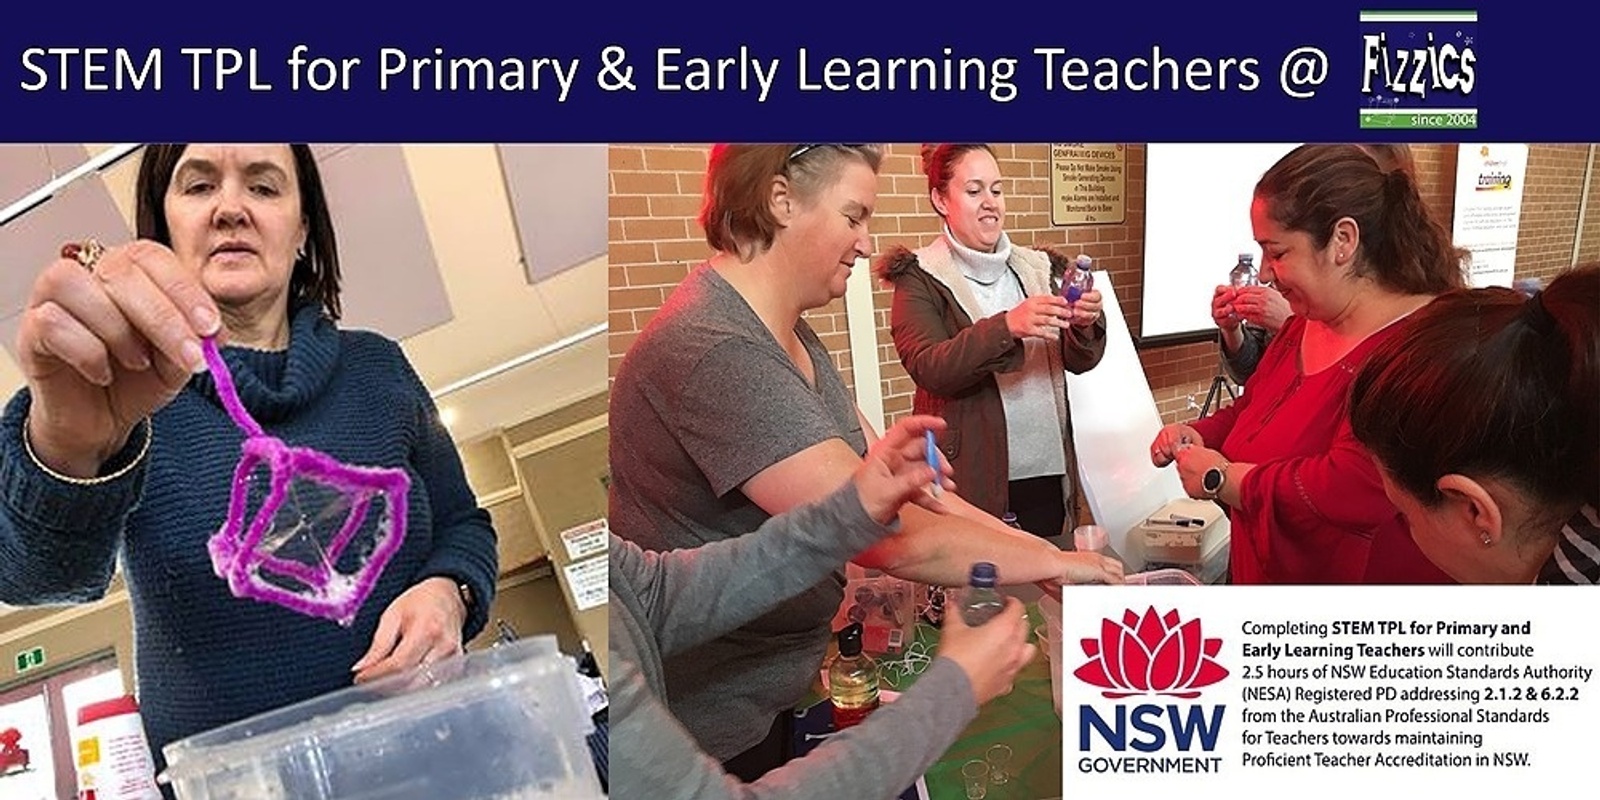 Banner image for STEM TPL for Primary & Early Learning Teachers